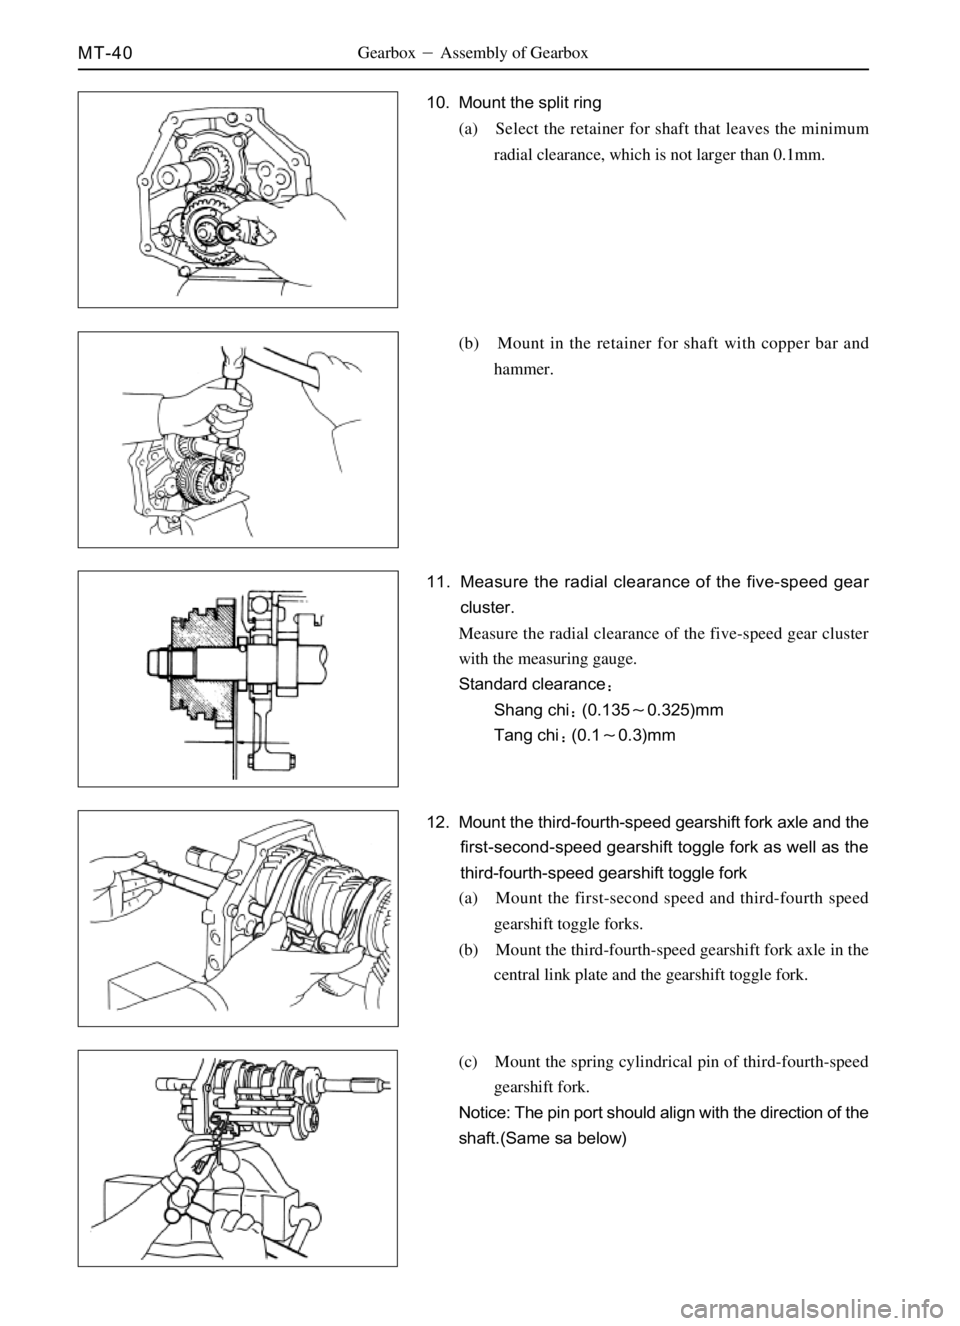 GREAT WALL SO COOL 2006 Workshop Manual MT-40Gearbox Assembly of Gearbox
10. Mount the split ring
(a) Select the retainer for shaft that leaves the minimum
radial clearance, which is not larger than 0.1mm.
(b) Mount in the retainer for sha